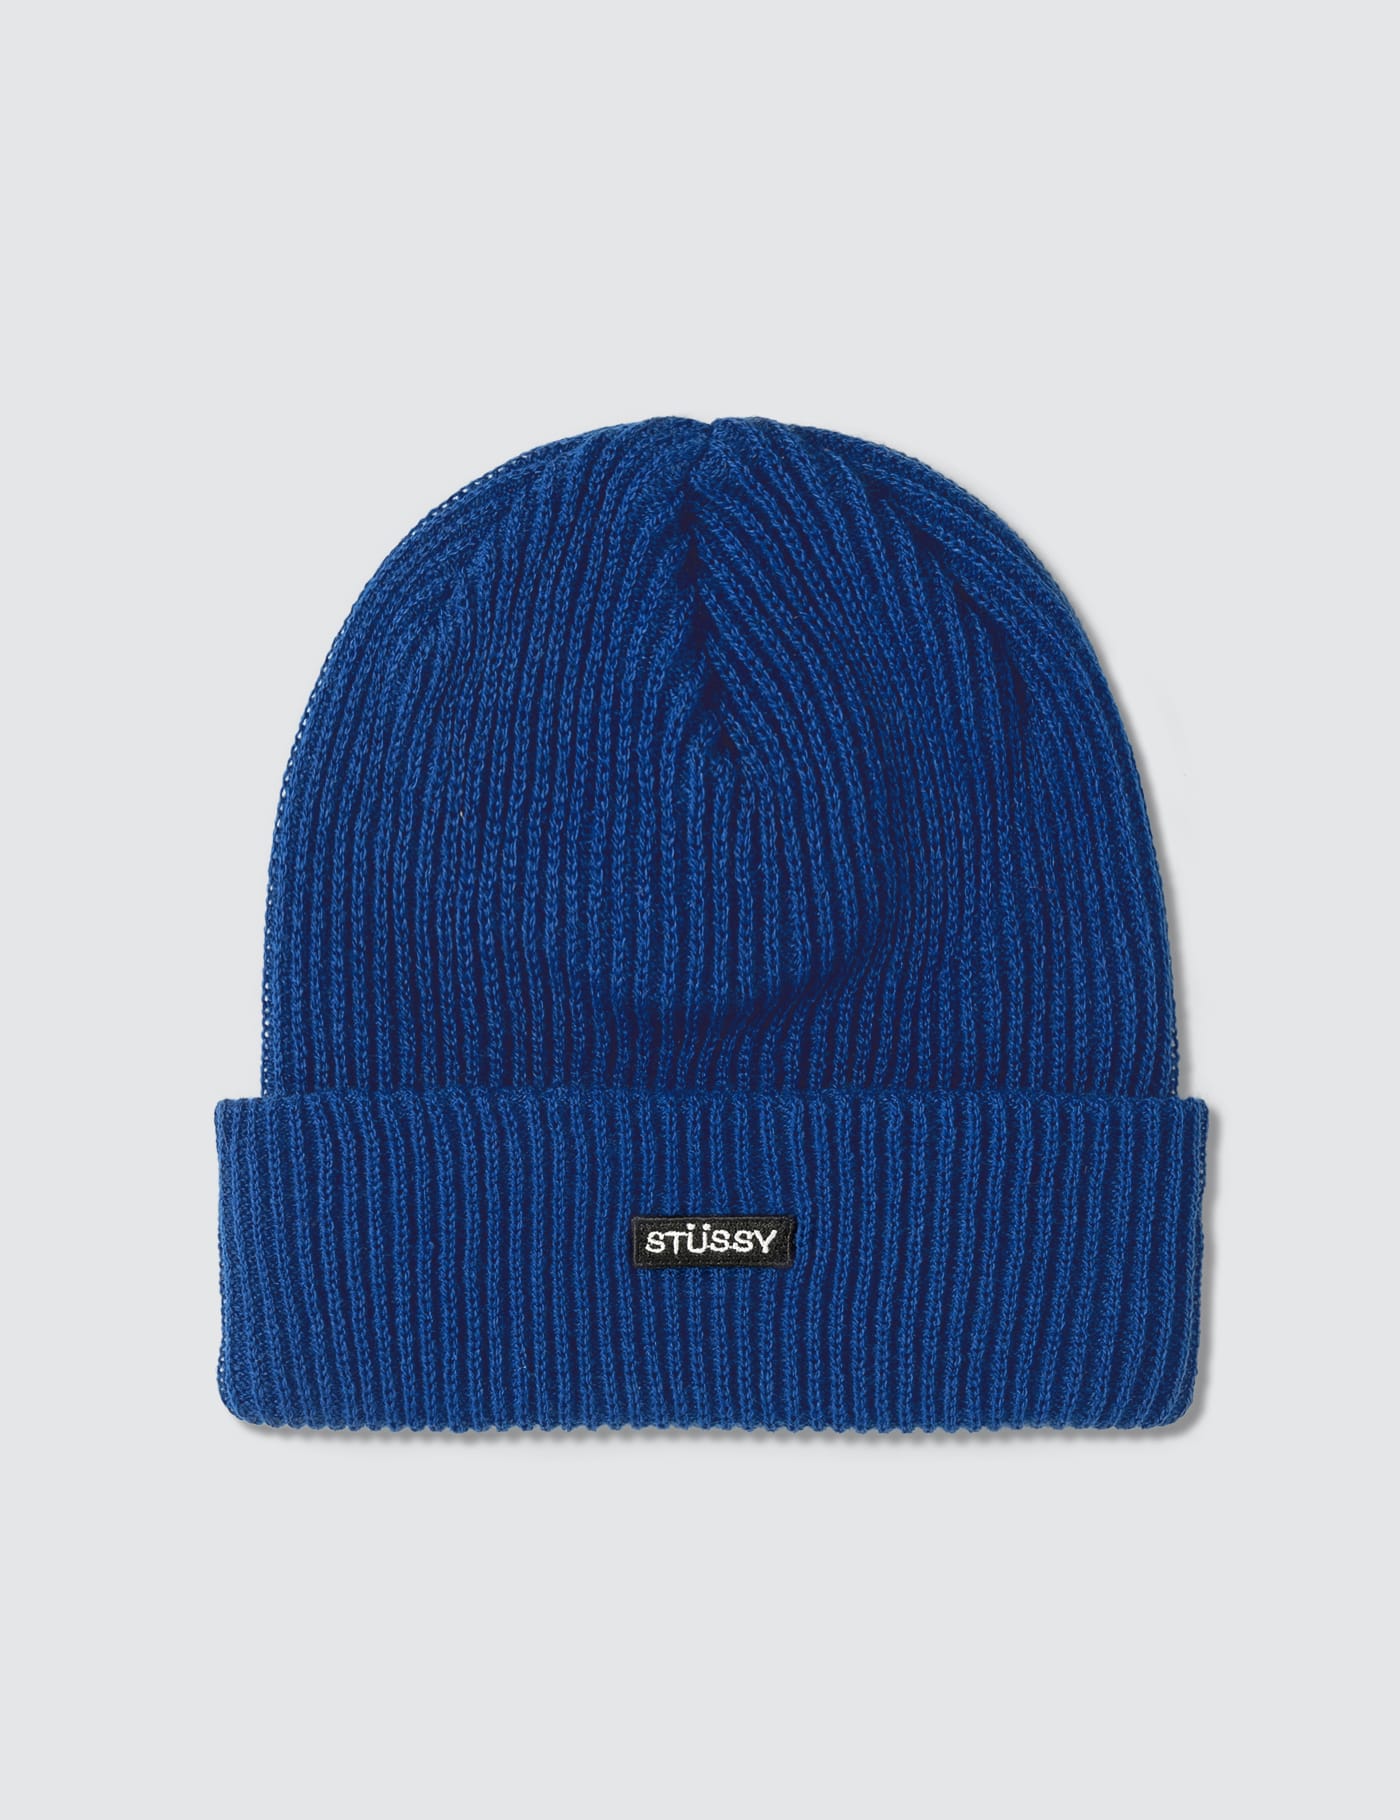 Stüssy - Small Patch Watch Cap Beanie | HBX - Globally Curated 